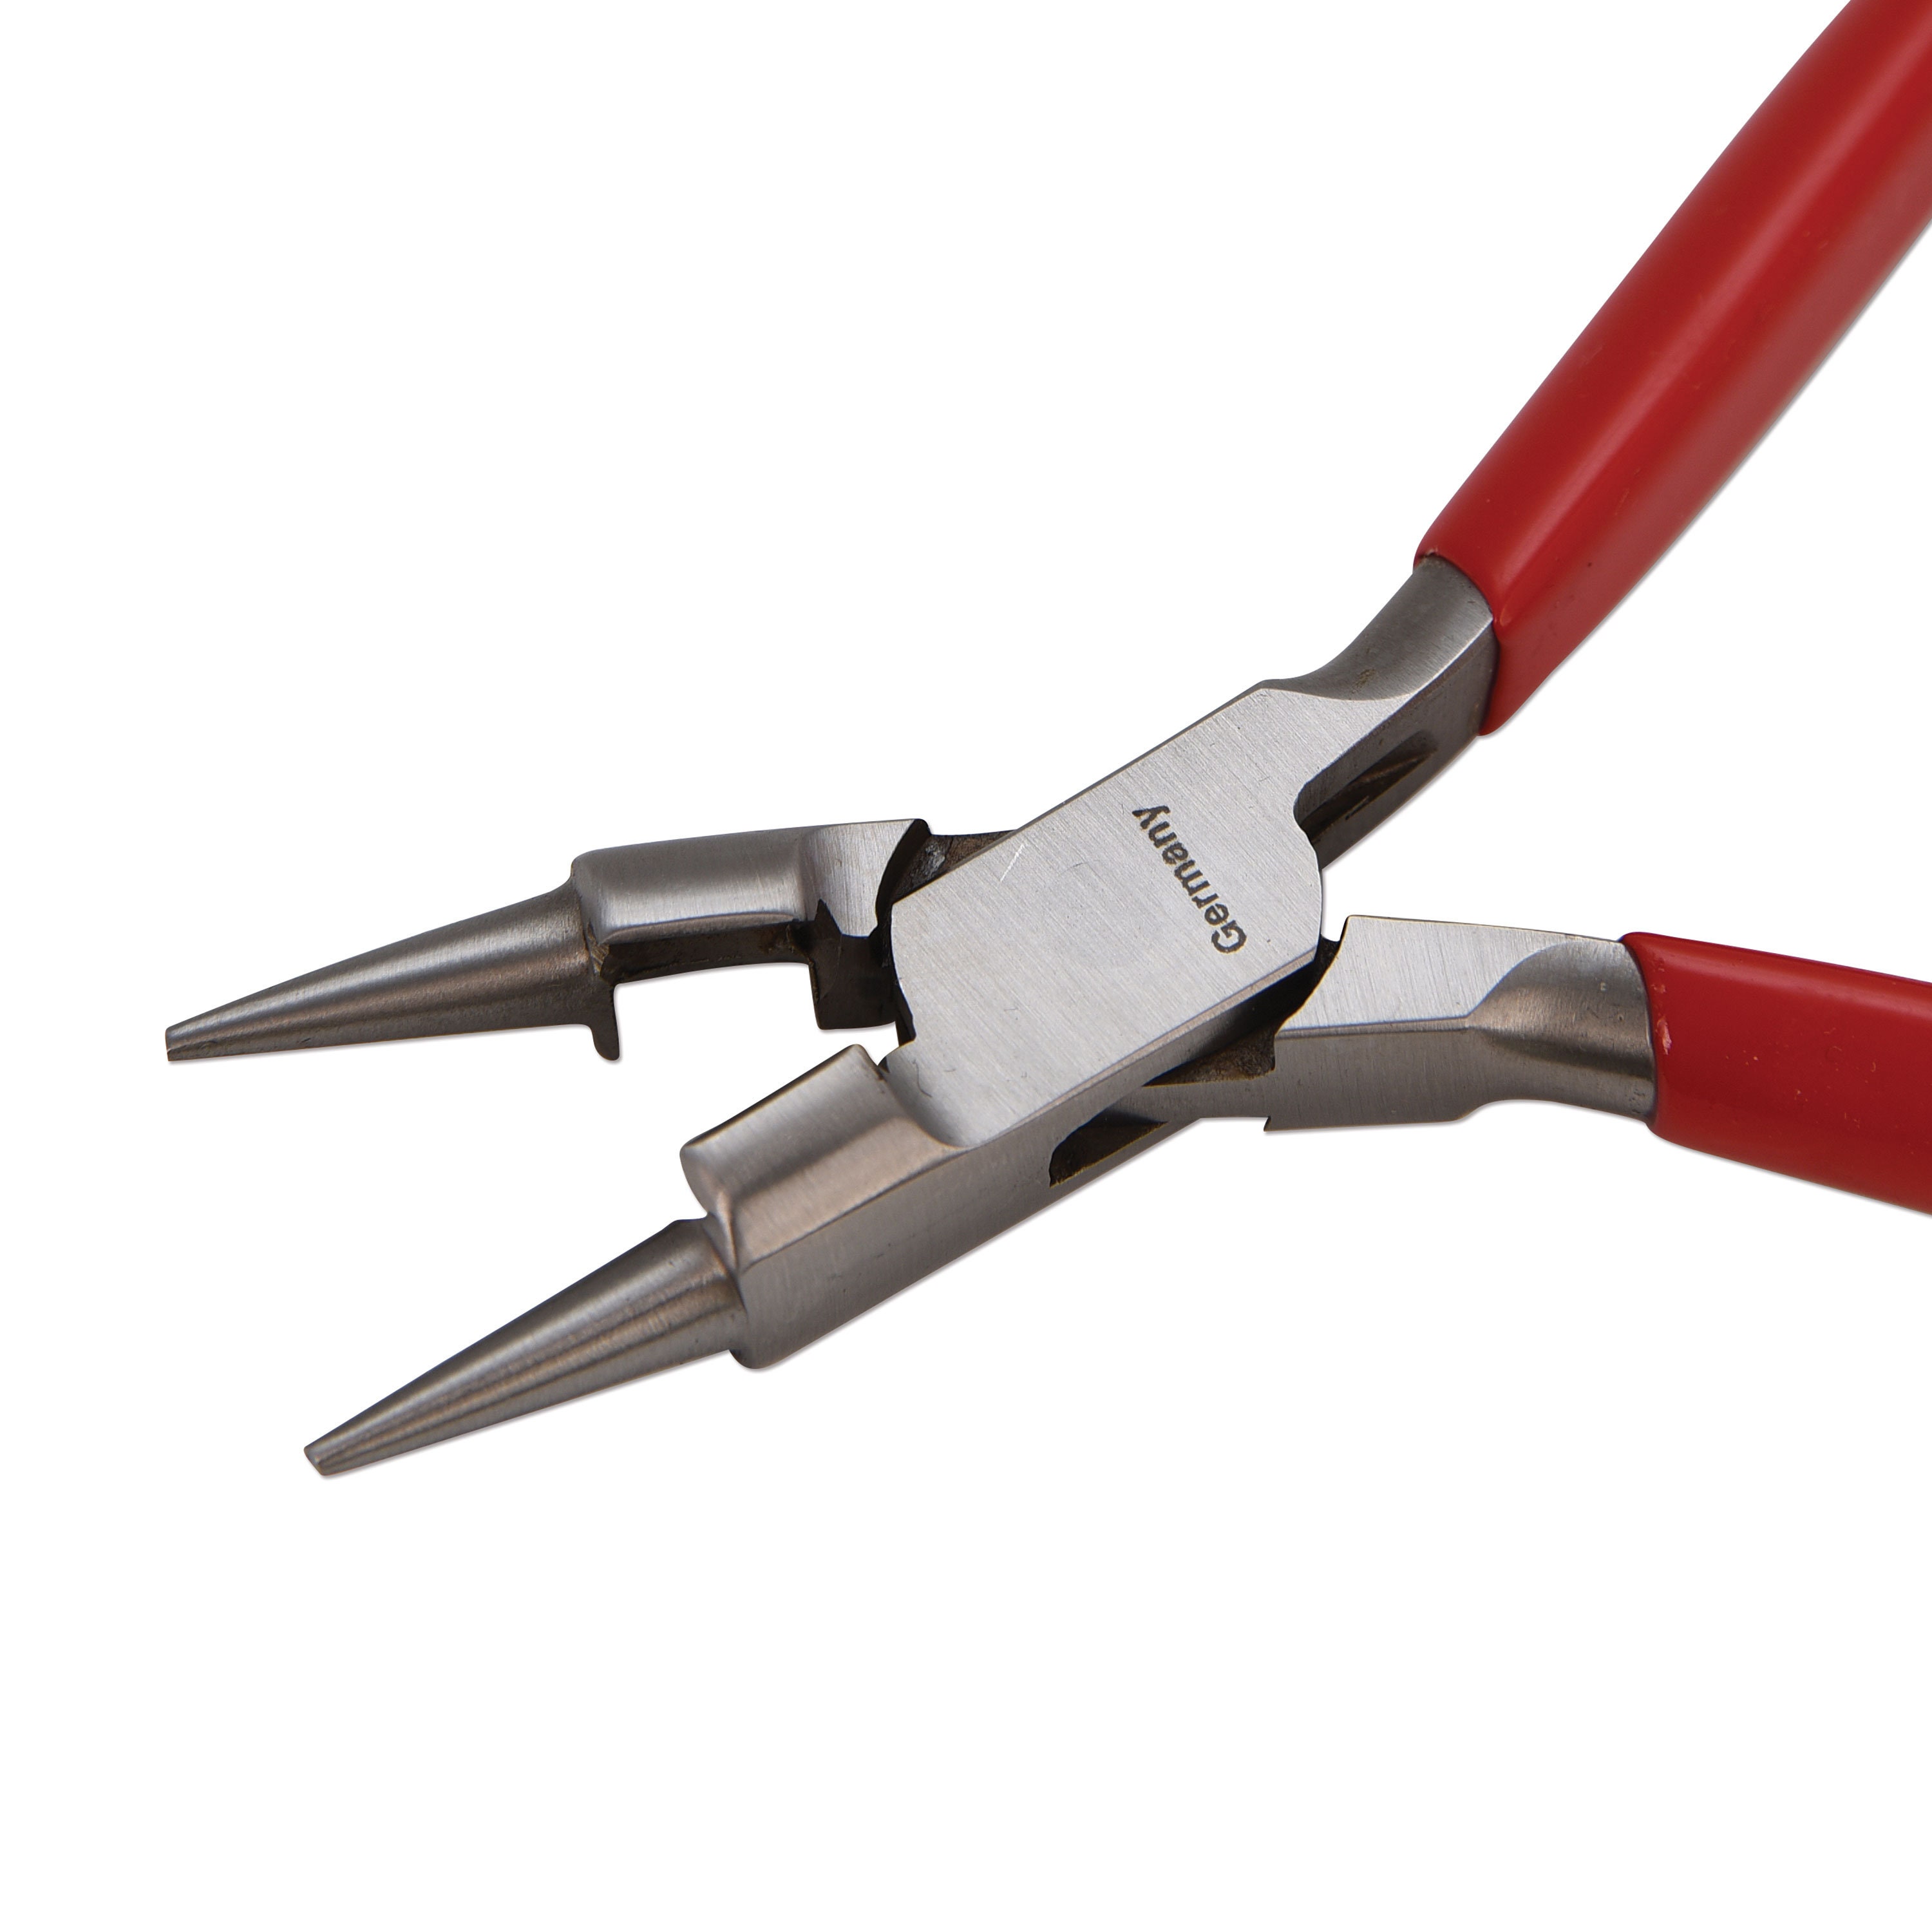 The tool you are missing. How to use ring bending pliers. You will thank  me! - GOTCHA ROCKS